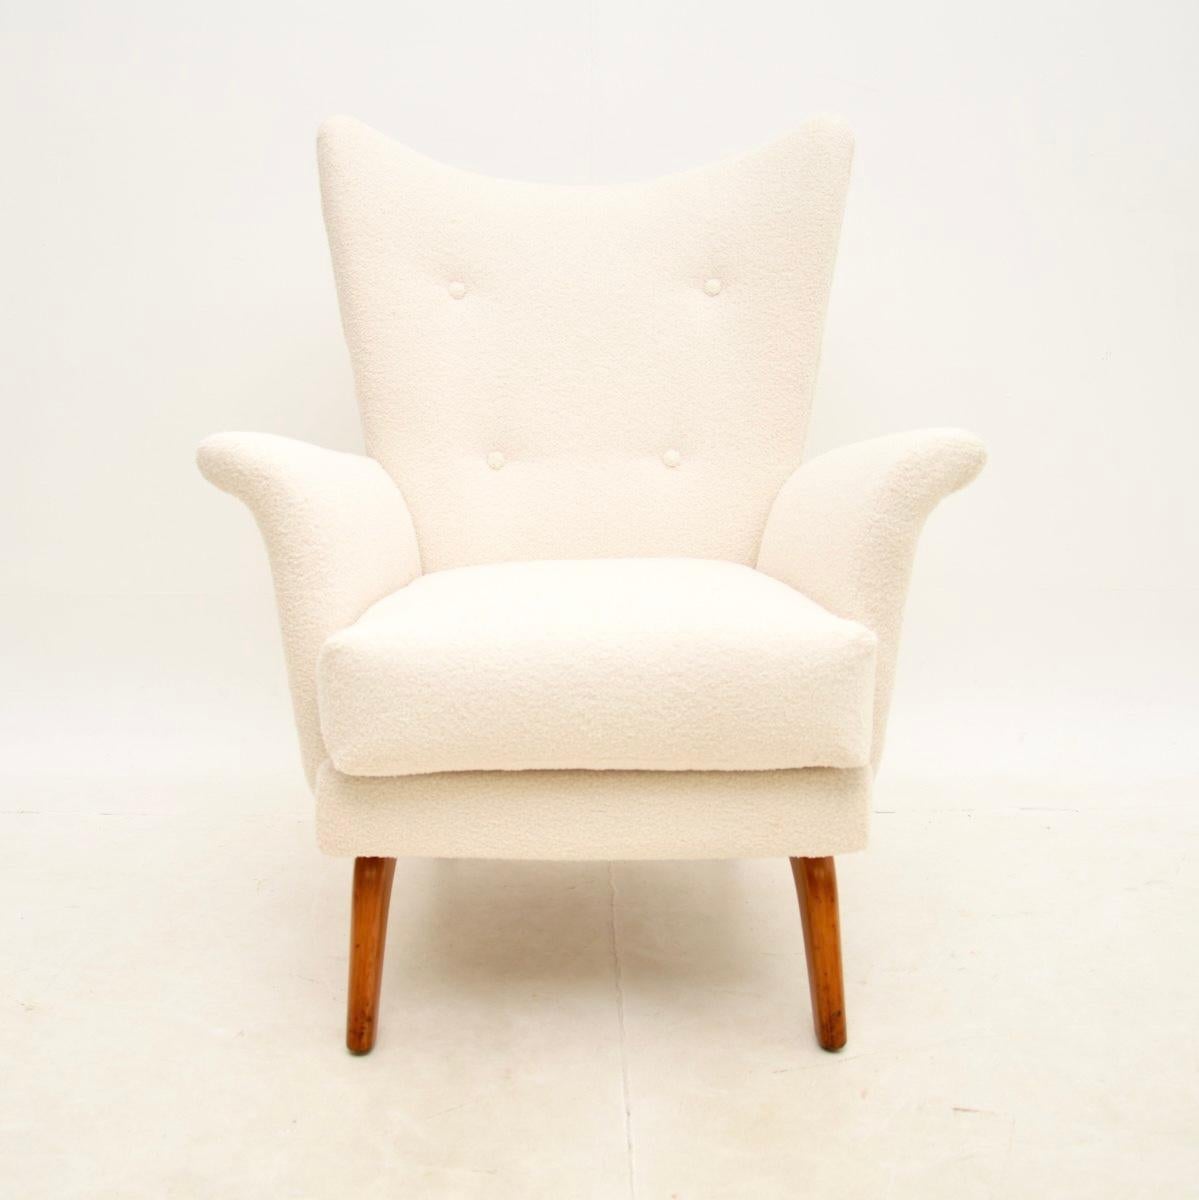 A very stylish and extremely comfortable vintage wing armchair by Howard Keith. This was made in England, it dates from the 1960’s.

It is of amazing quality and is a lovely size, quite small and compact yet offering a generous seating area.

We